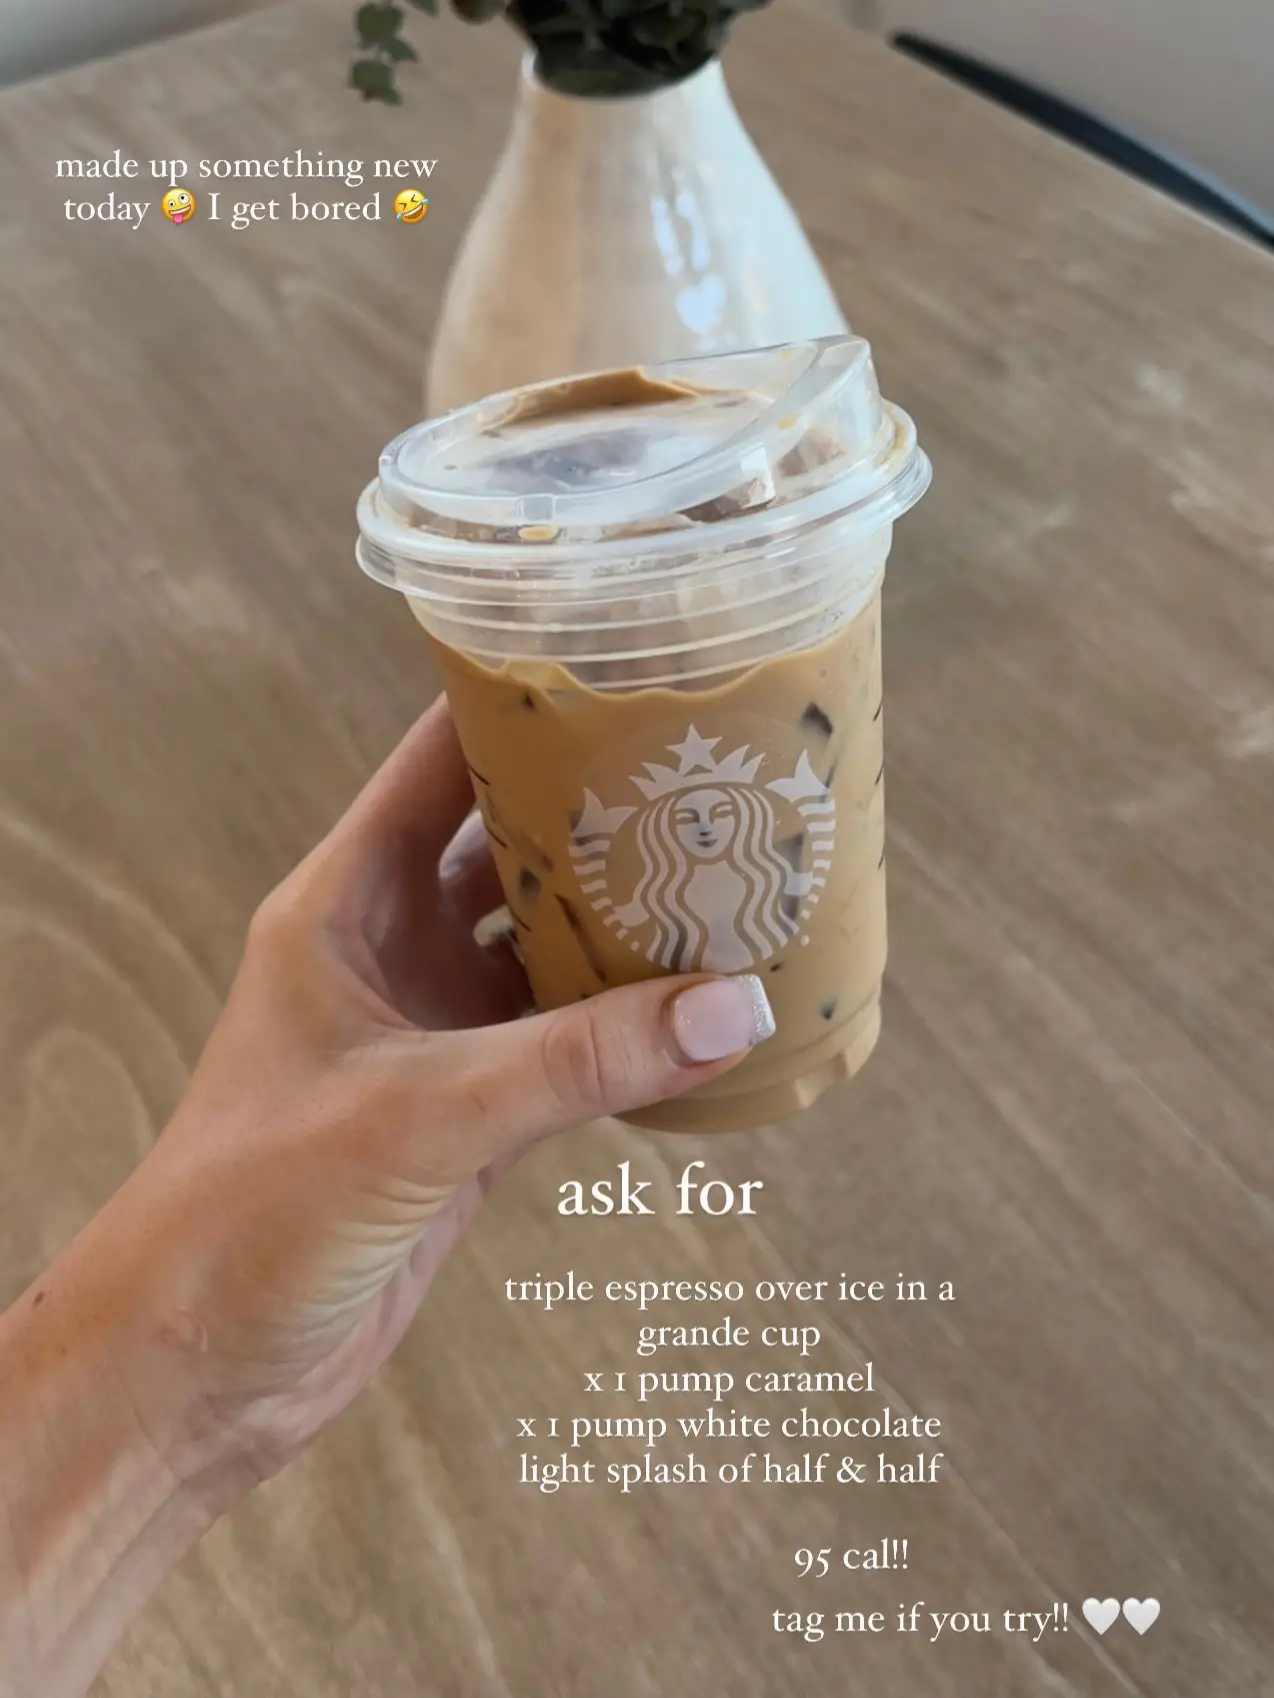 95 cal starbs order!! 🤍☕️'s images